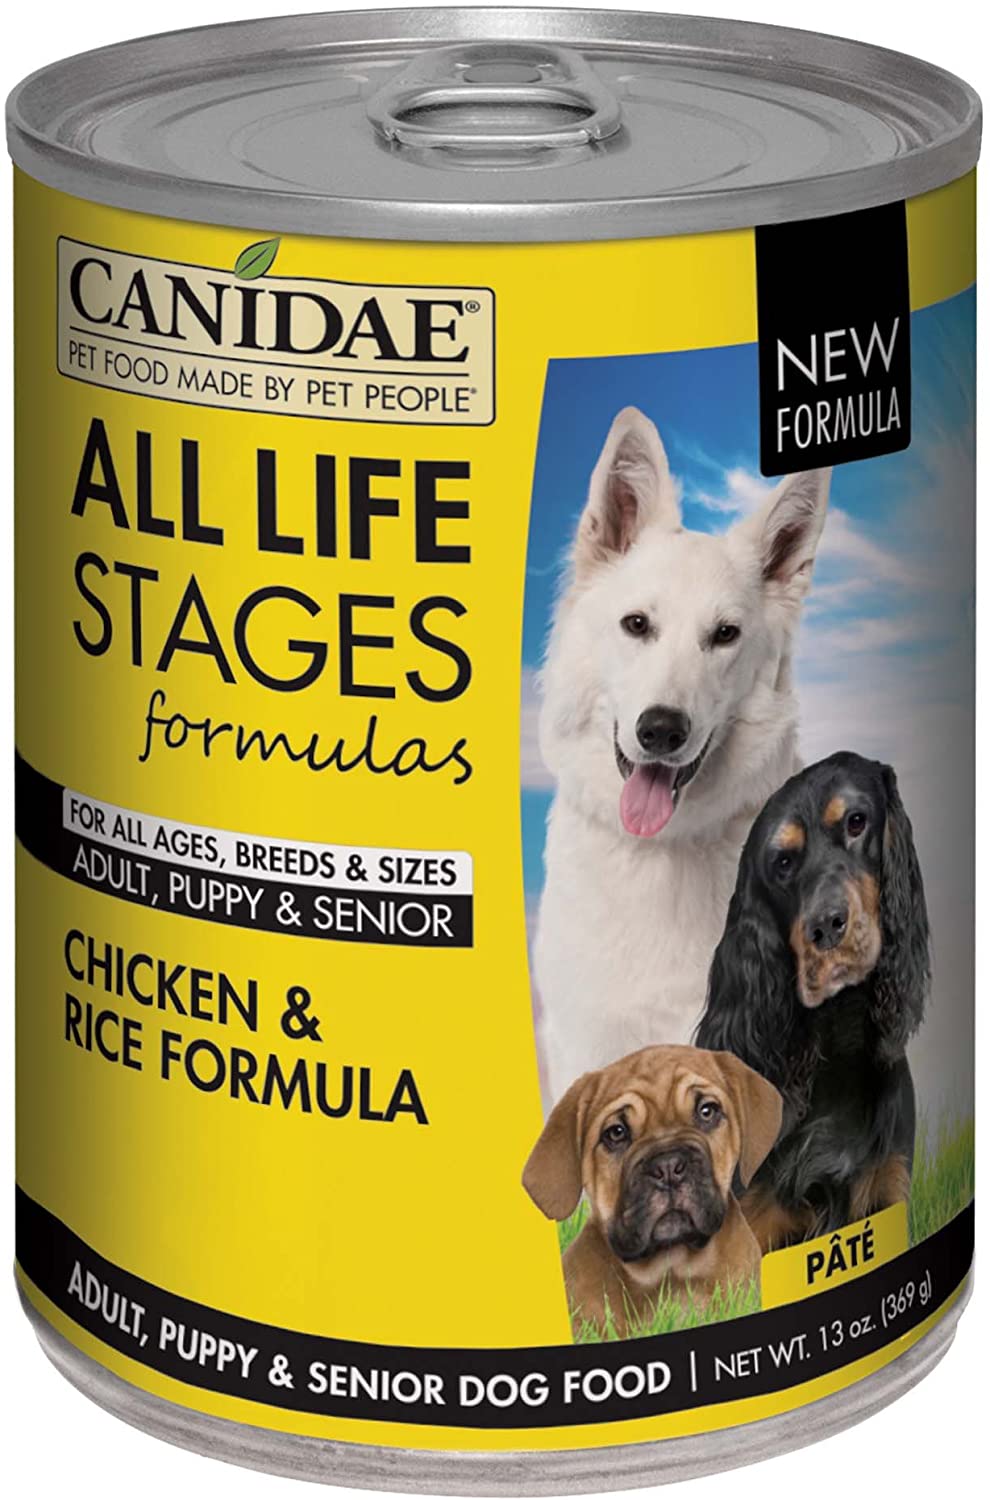 Canidae Canned Dog Food For Dogs Of All Life Stages